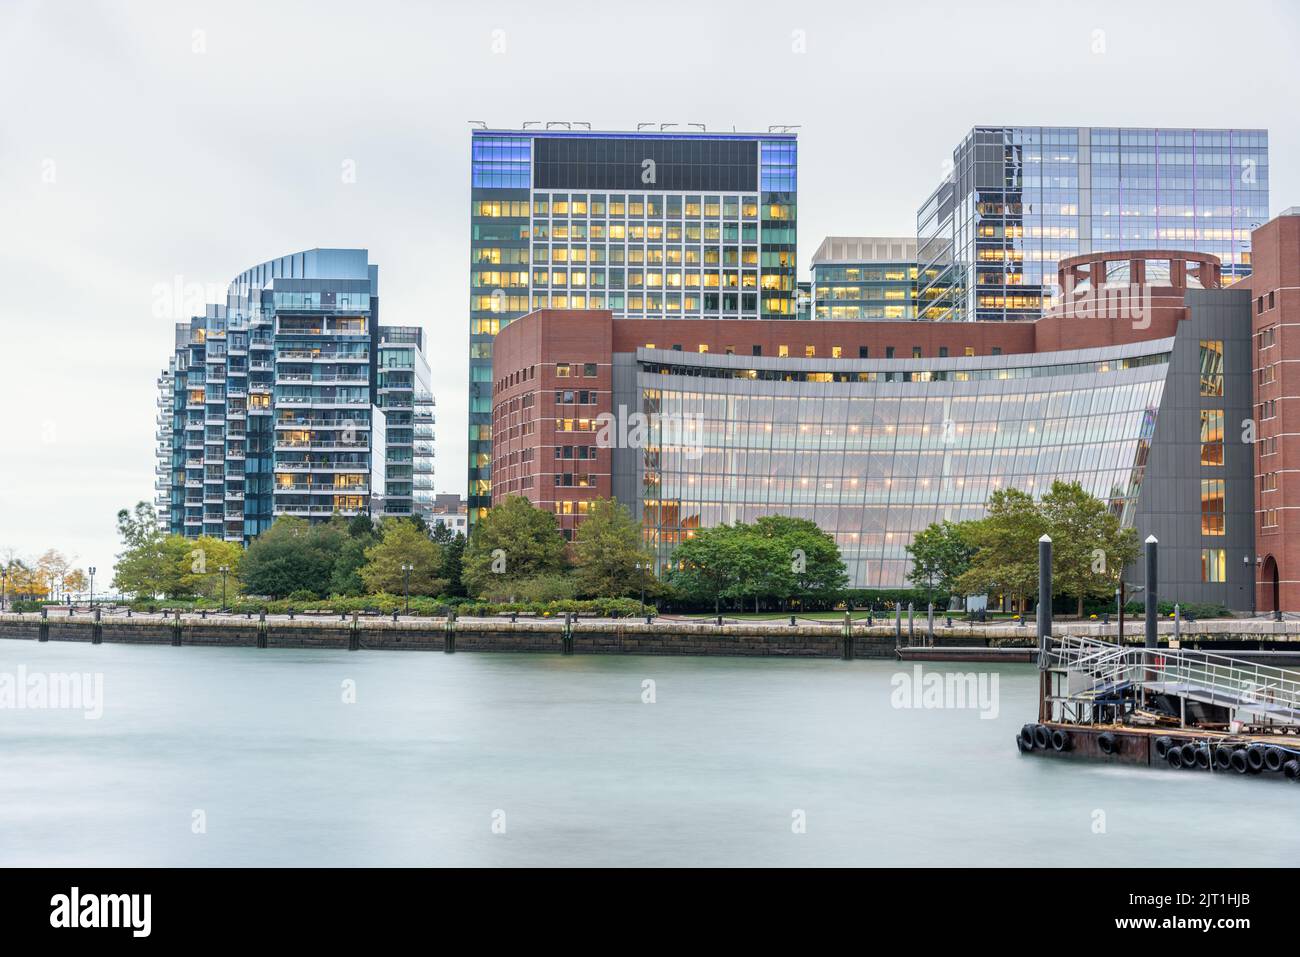 Waterfront apartment buildings and blocks of offices on a cloudy autumn evening. Boston, MA, USA. Stock Photo